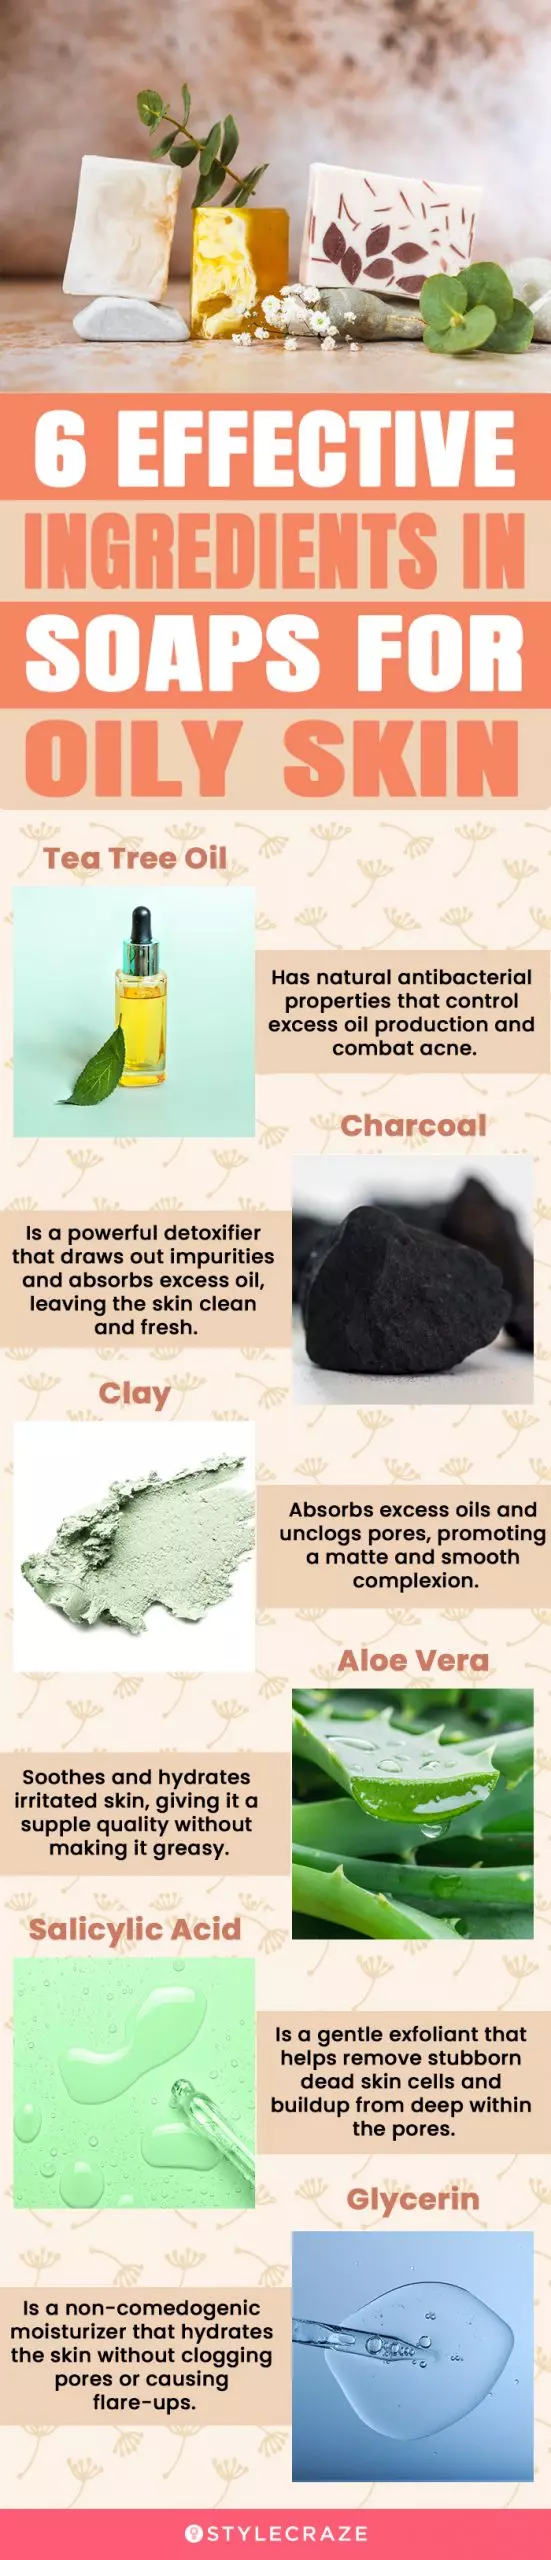 6 Effective Ingredients In Soaps For Oily Skin (infographic)